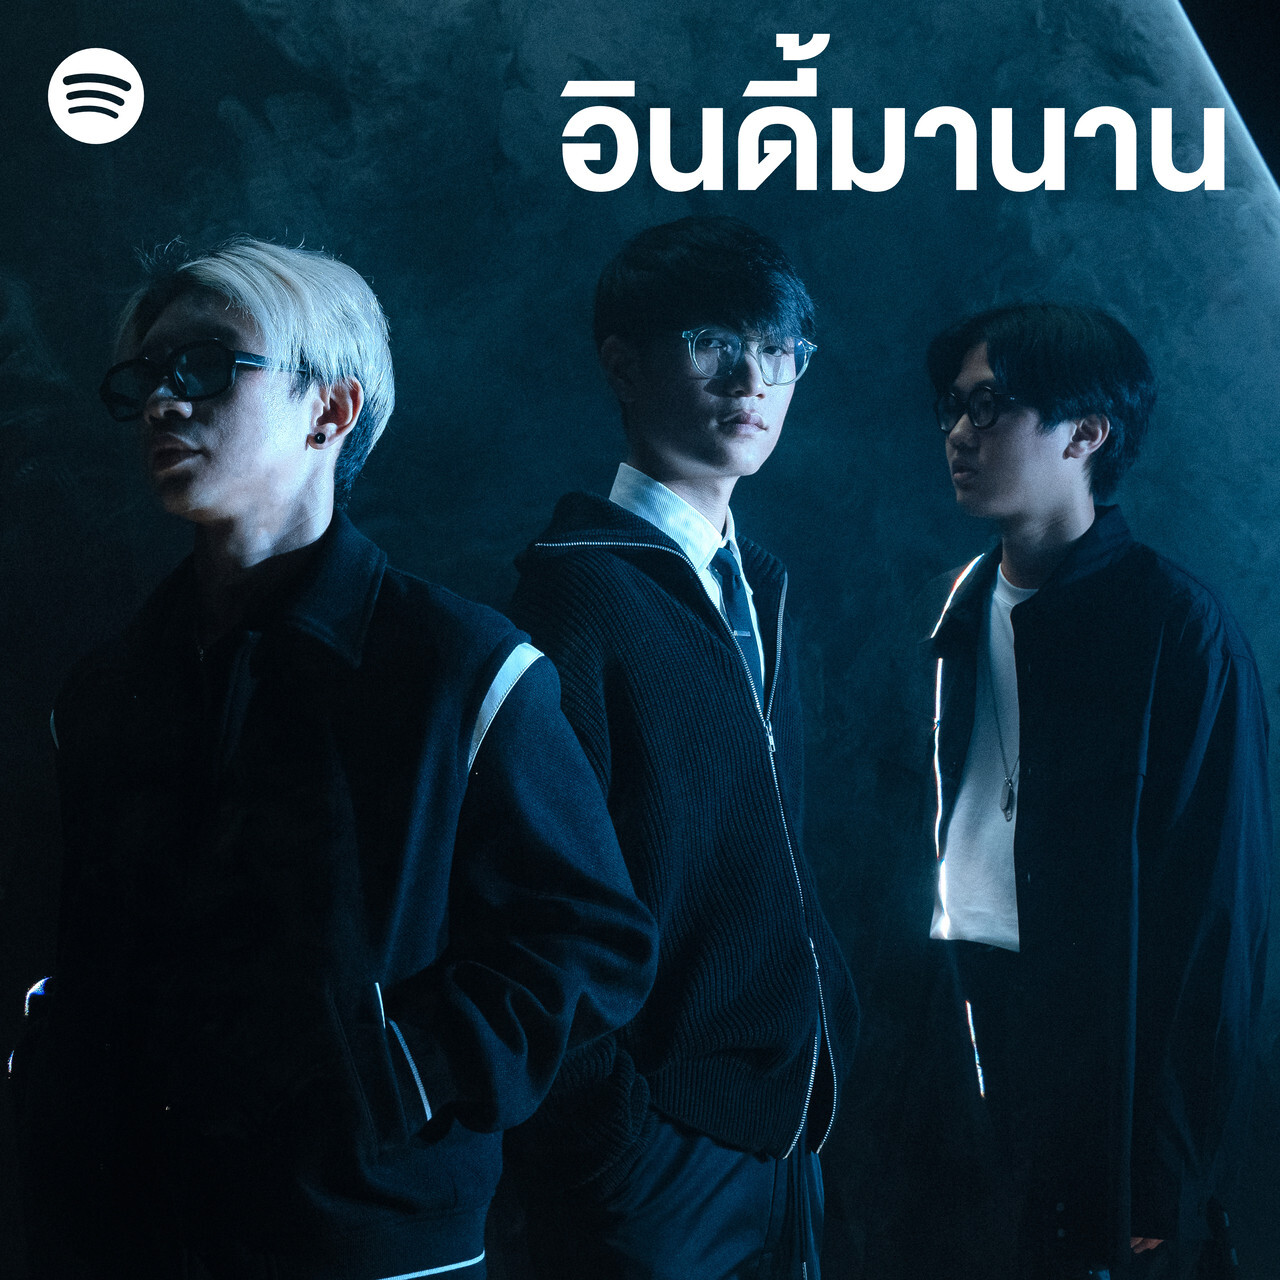 Spotify celebrates Thai Indie with a relaunch of its flagship Indie playlist, now called "อินดี้ศาสตร์" Indieology hits Thailand